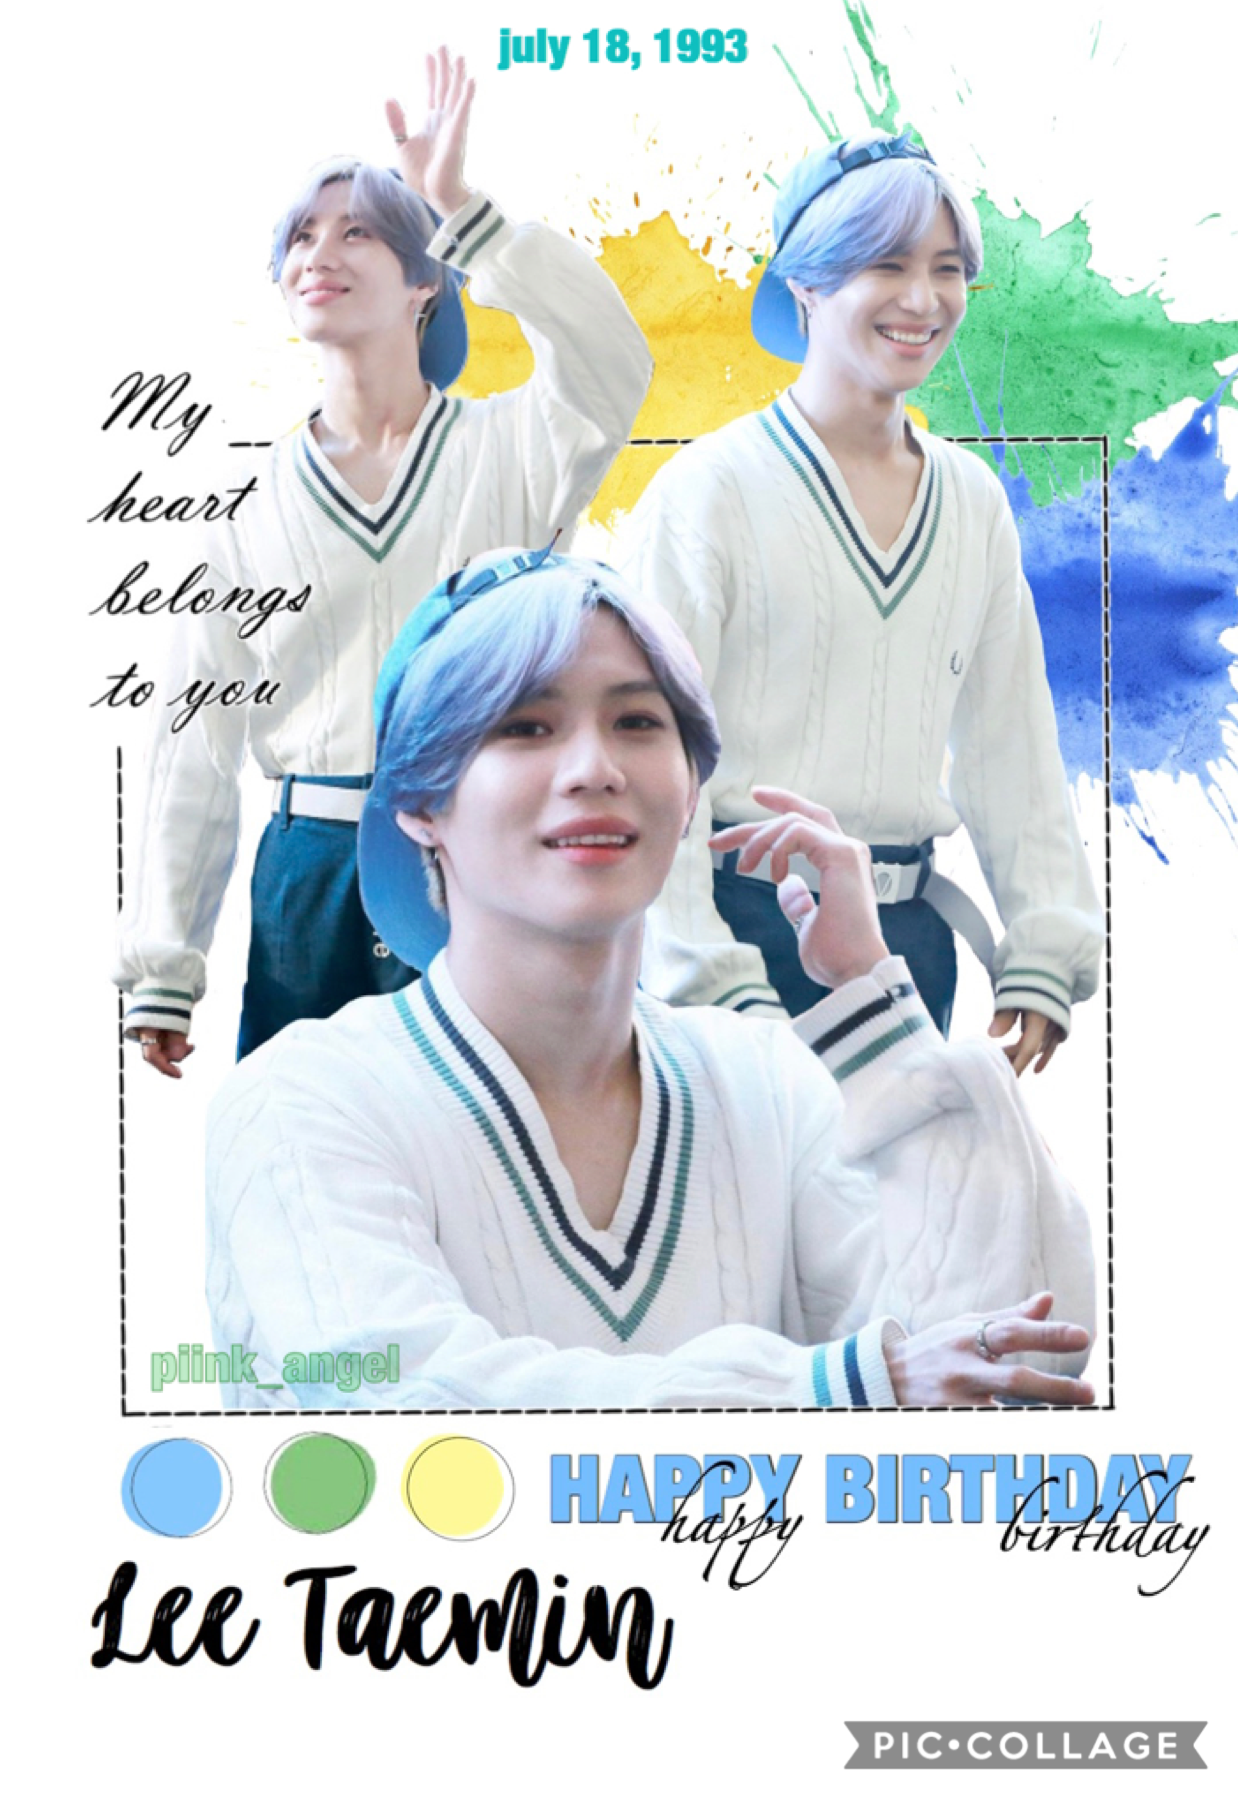 TAP 🍓
I was trying to complete another edit before i posted this one, but I didn’t like it and started over too much 😪
Happy Birthday Taemin!!! 
I hope you’re all having a great day, are staying safe, and are happy!
🍃🌺